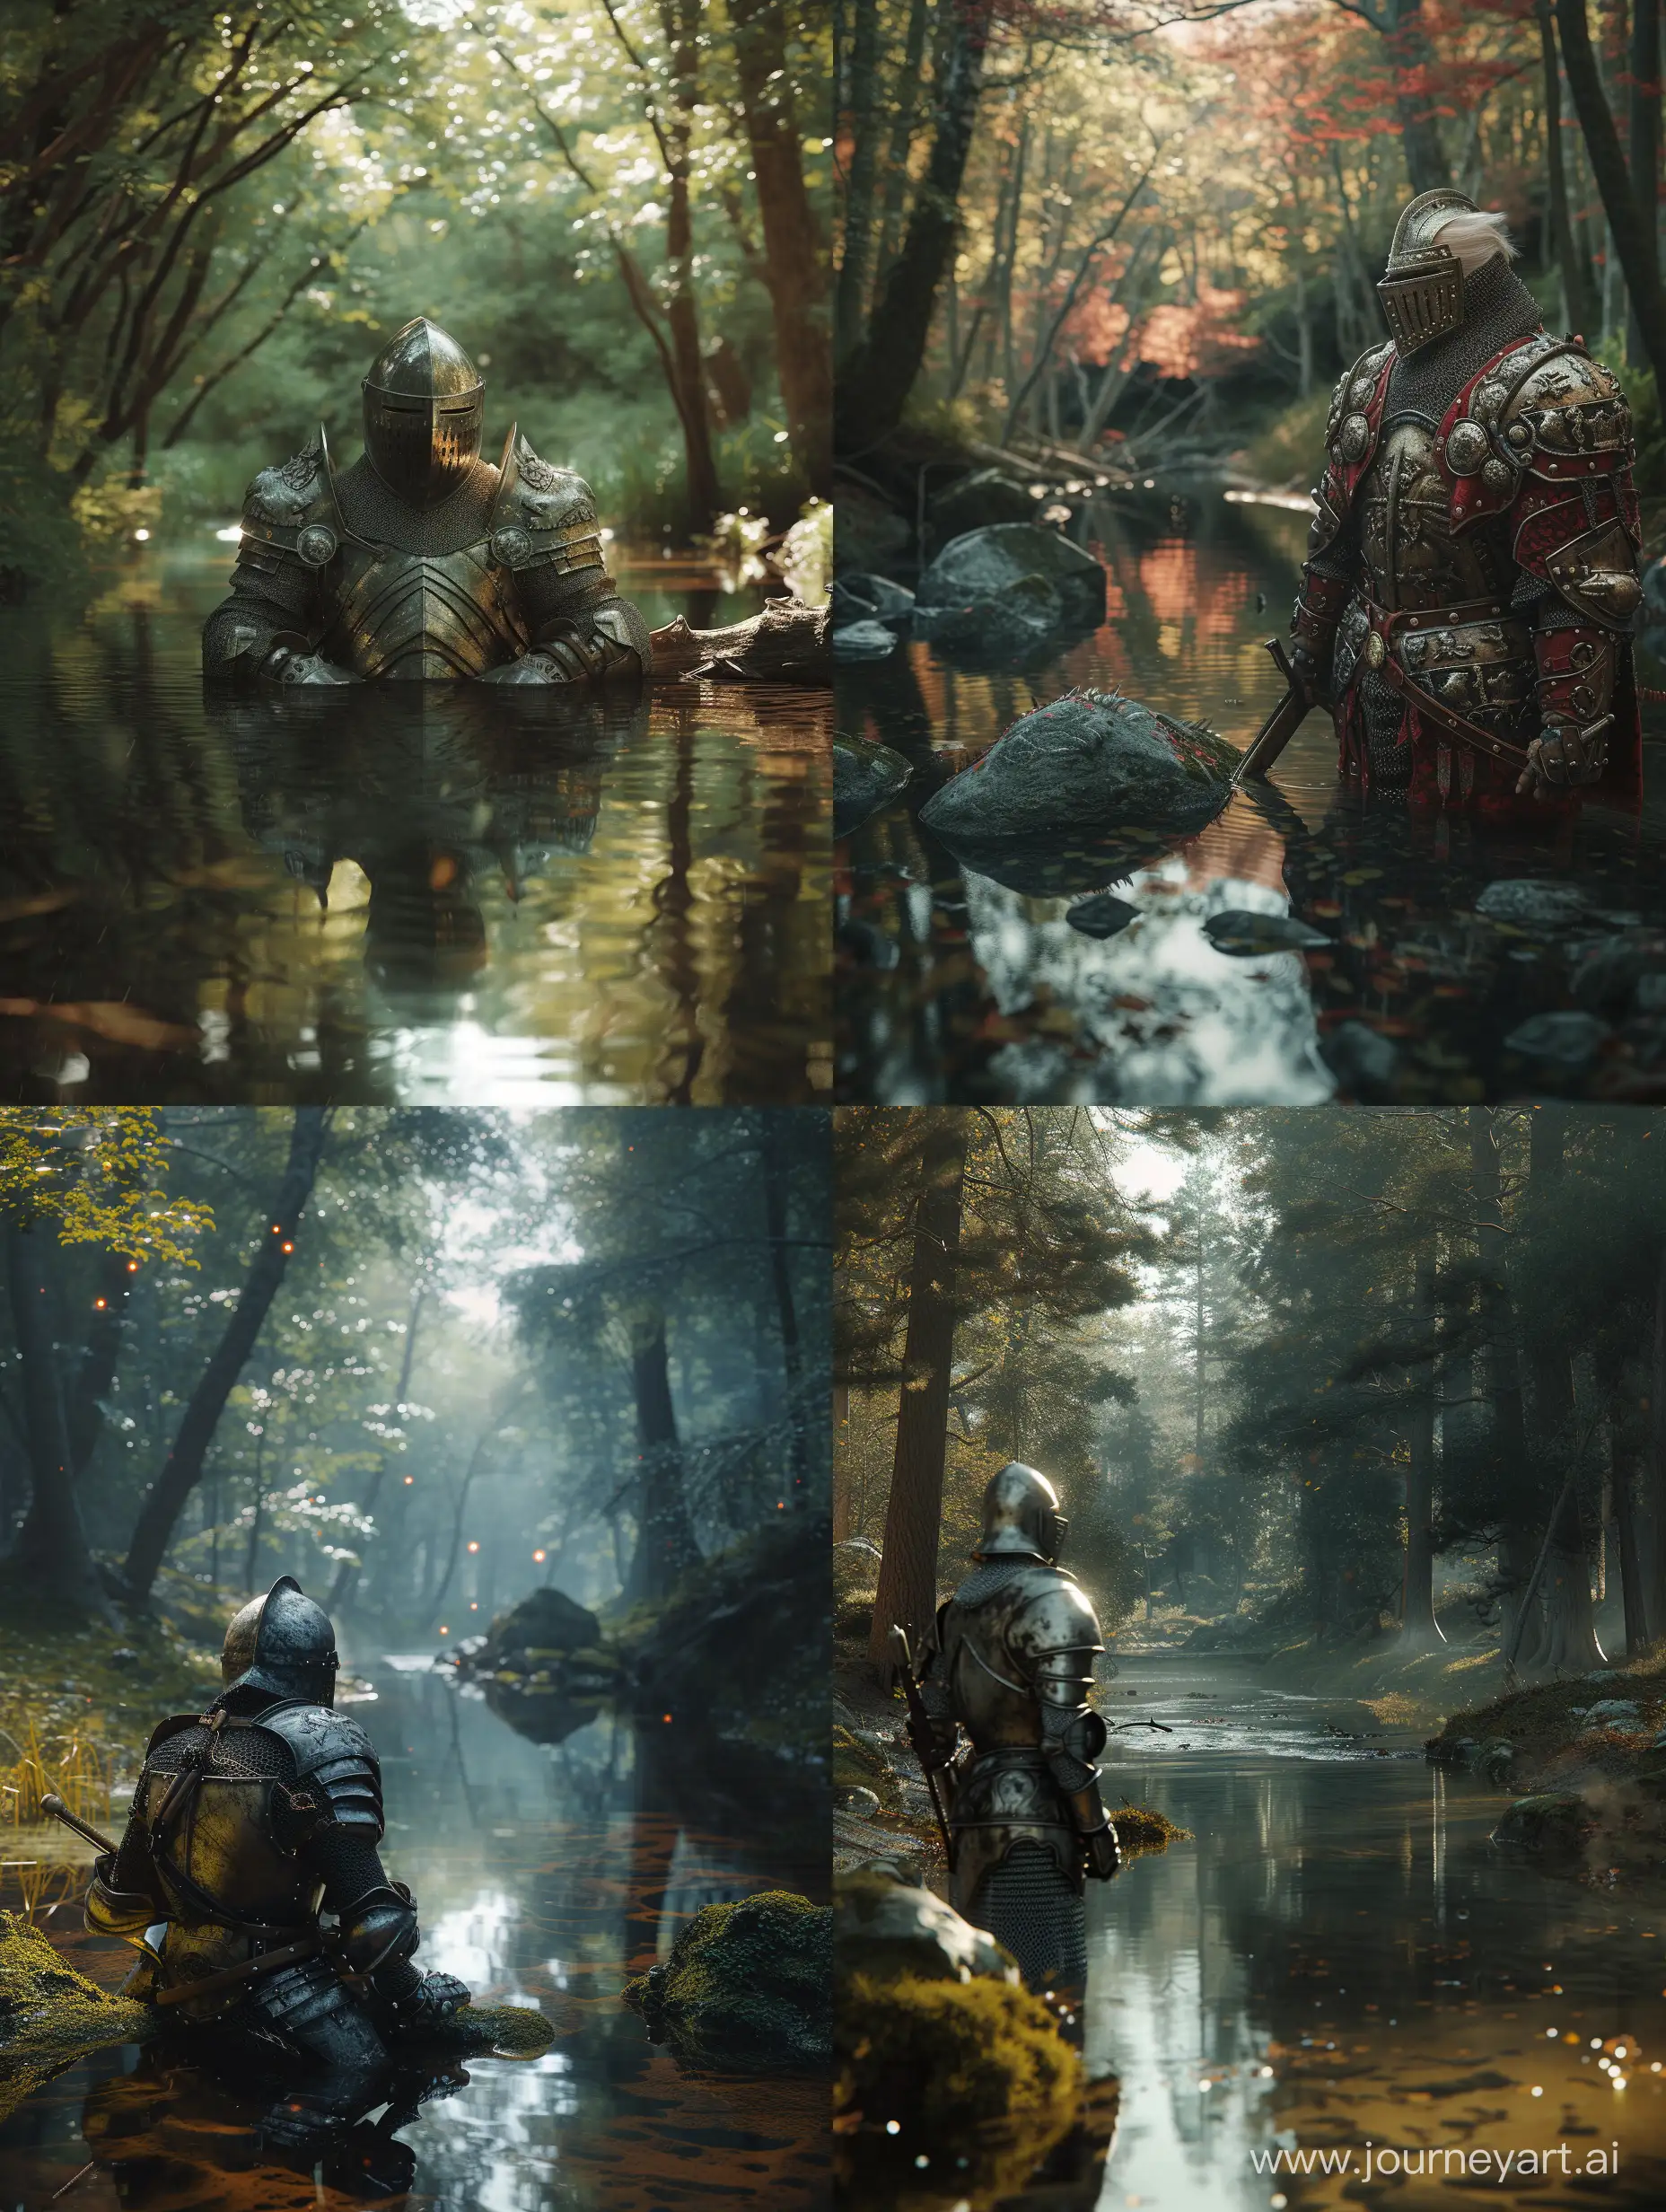 hyper realistic  trump wearing medieval armor  in a forest near a river; hyper realistic scene with all cinema techniques, lights, water, reflection, etc.; all the techniques that exist to make a photo hyper realistic and cinematic.